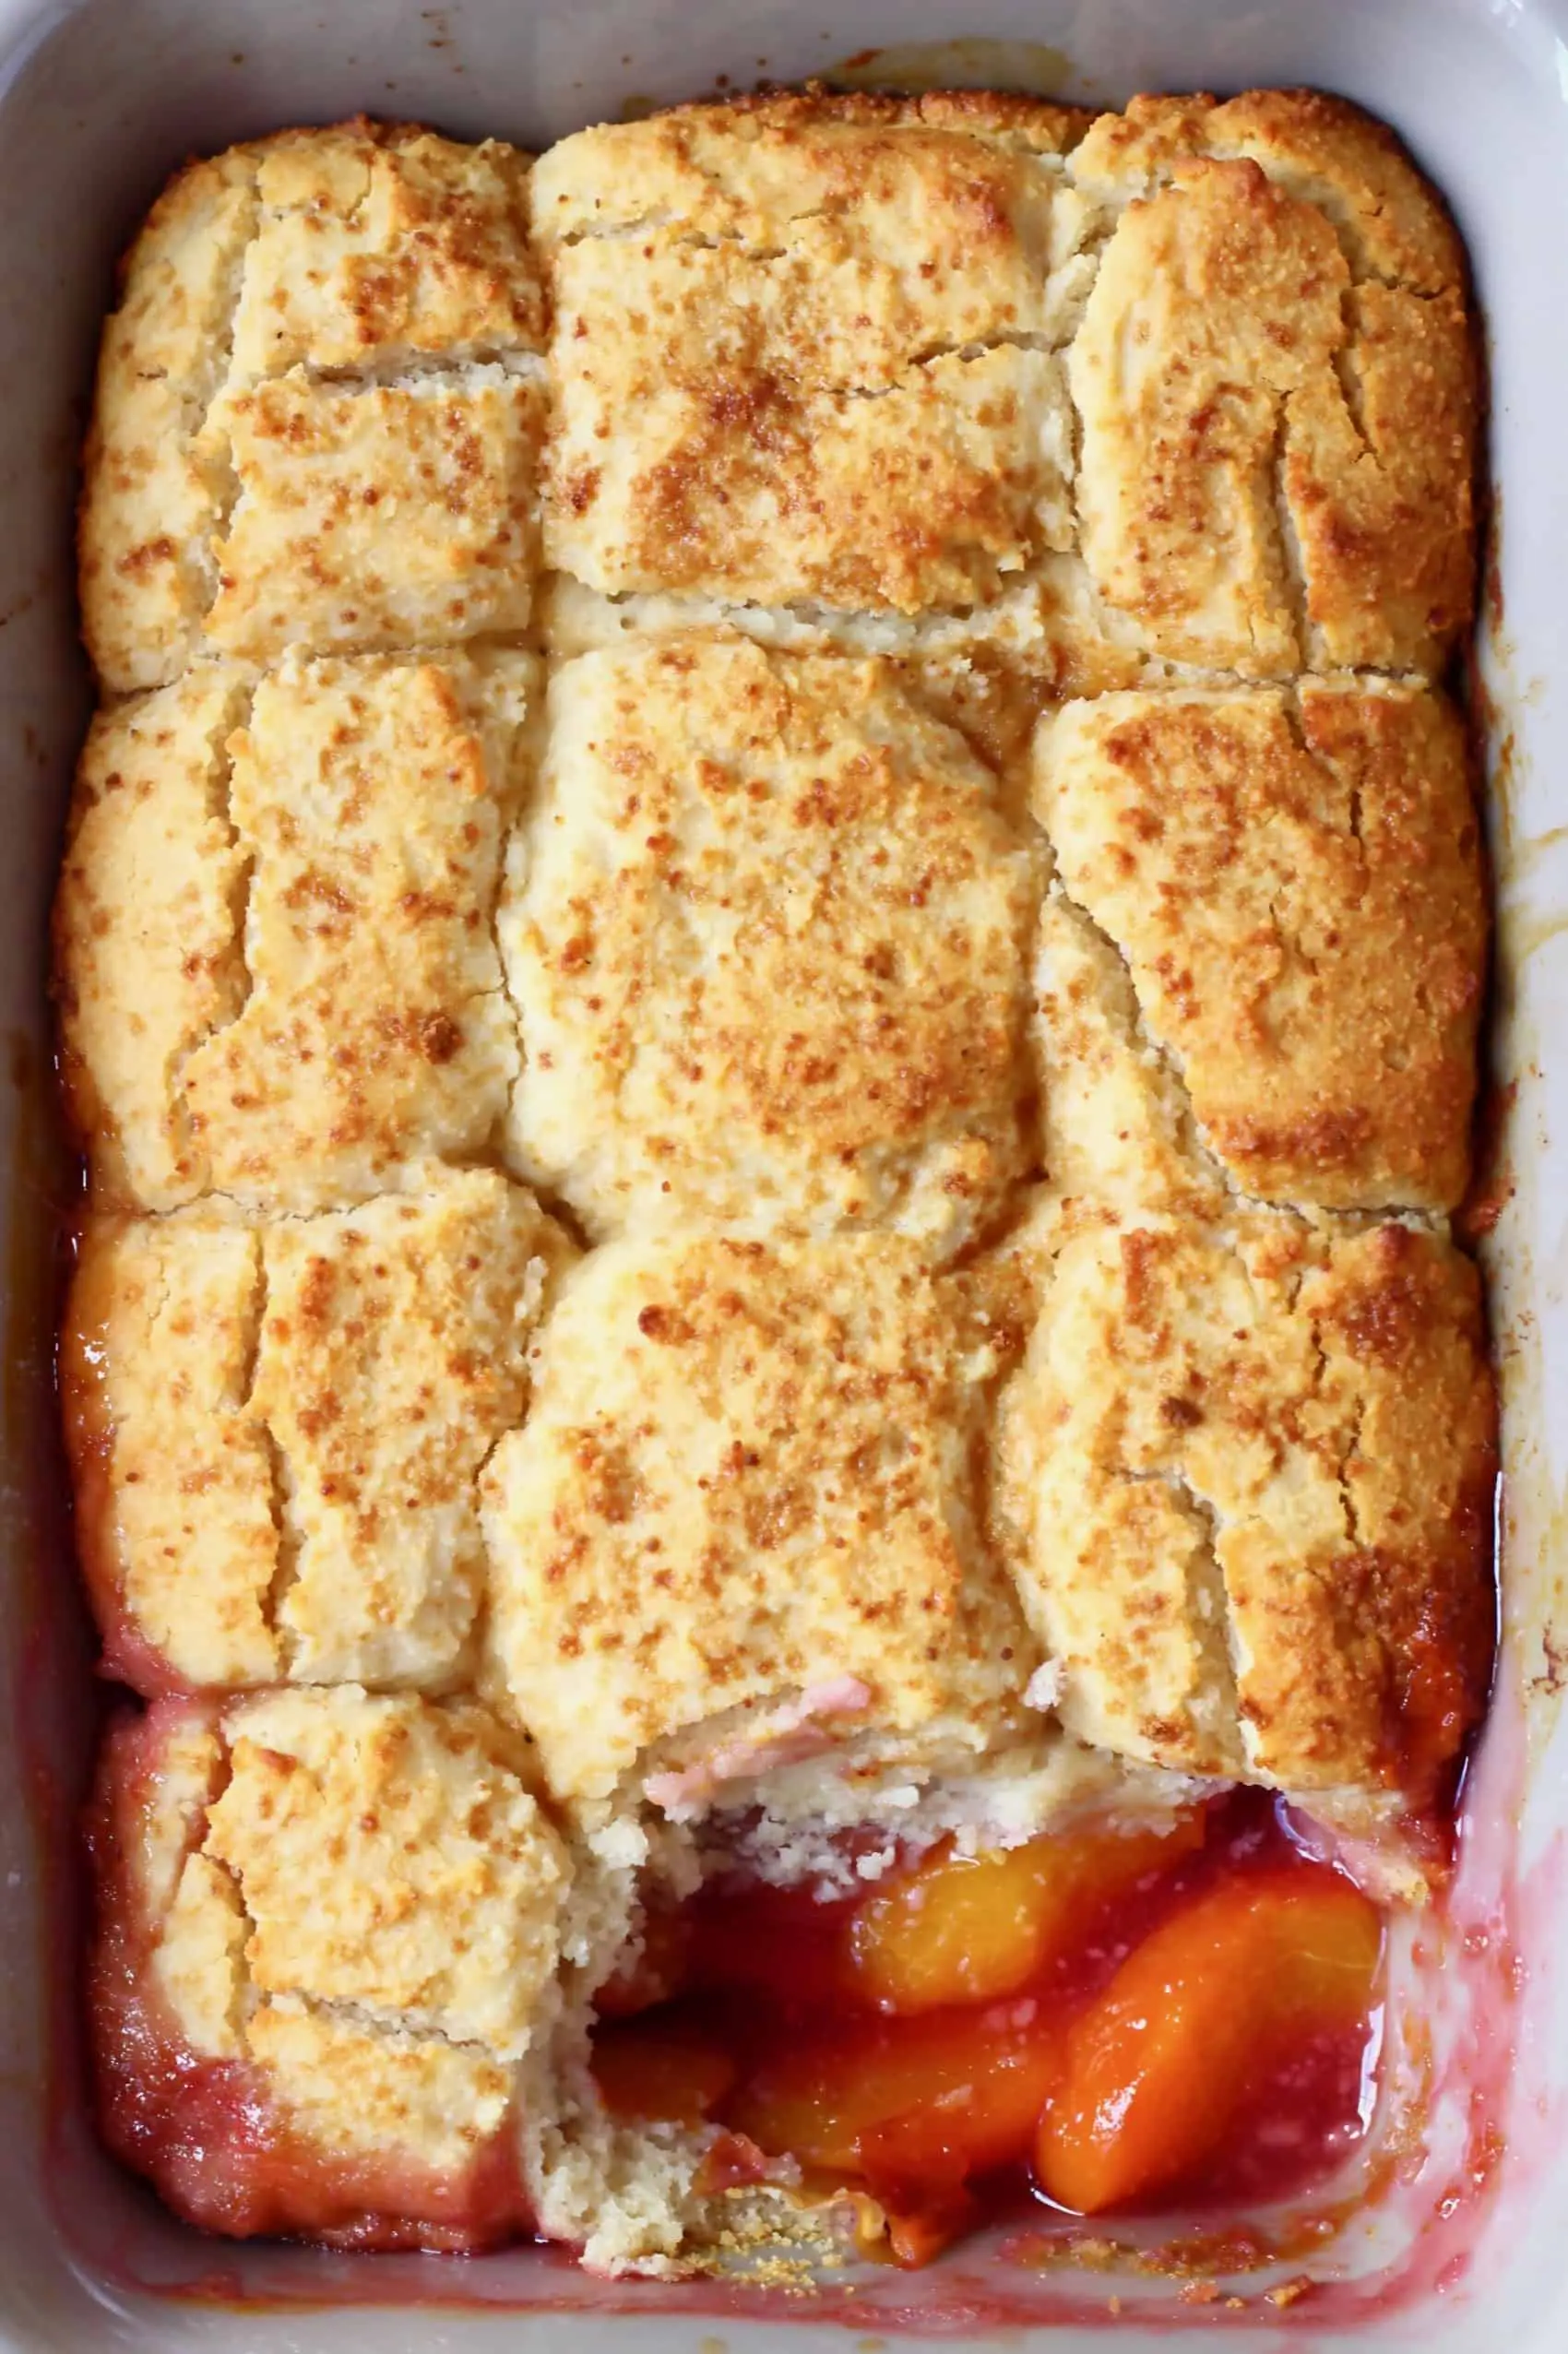 Peach cobbler in a rectangular grey baking tray with a spoonful taken out of it